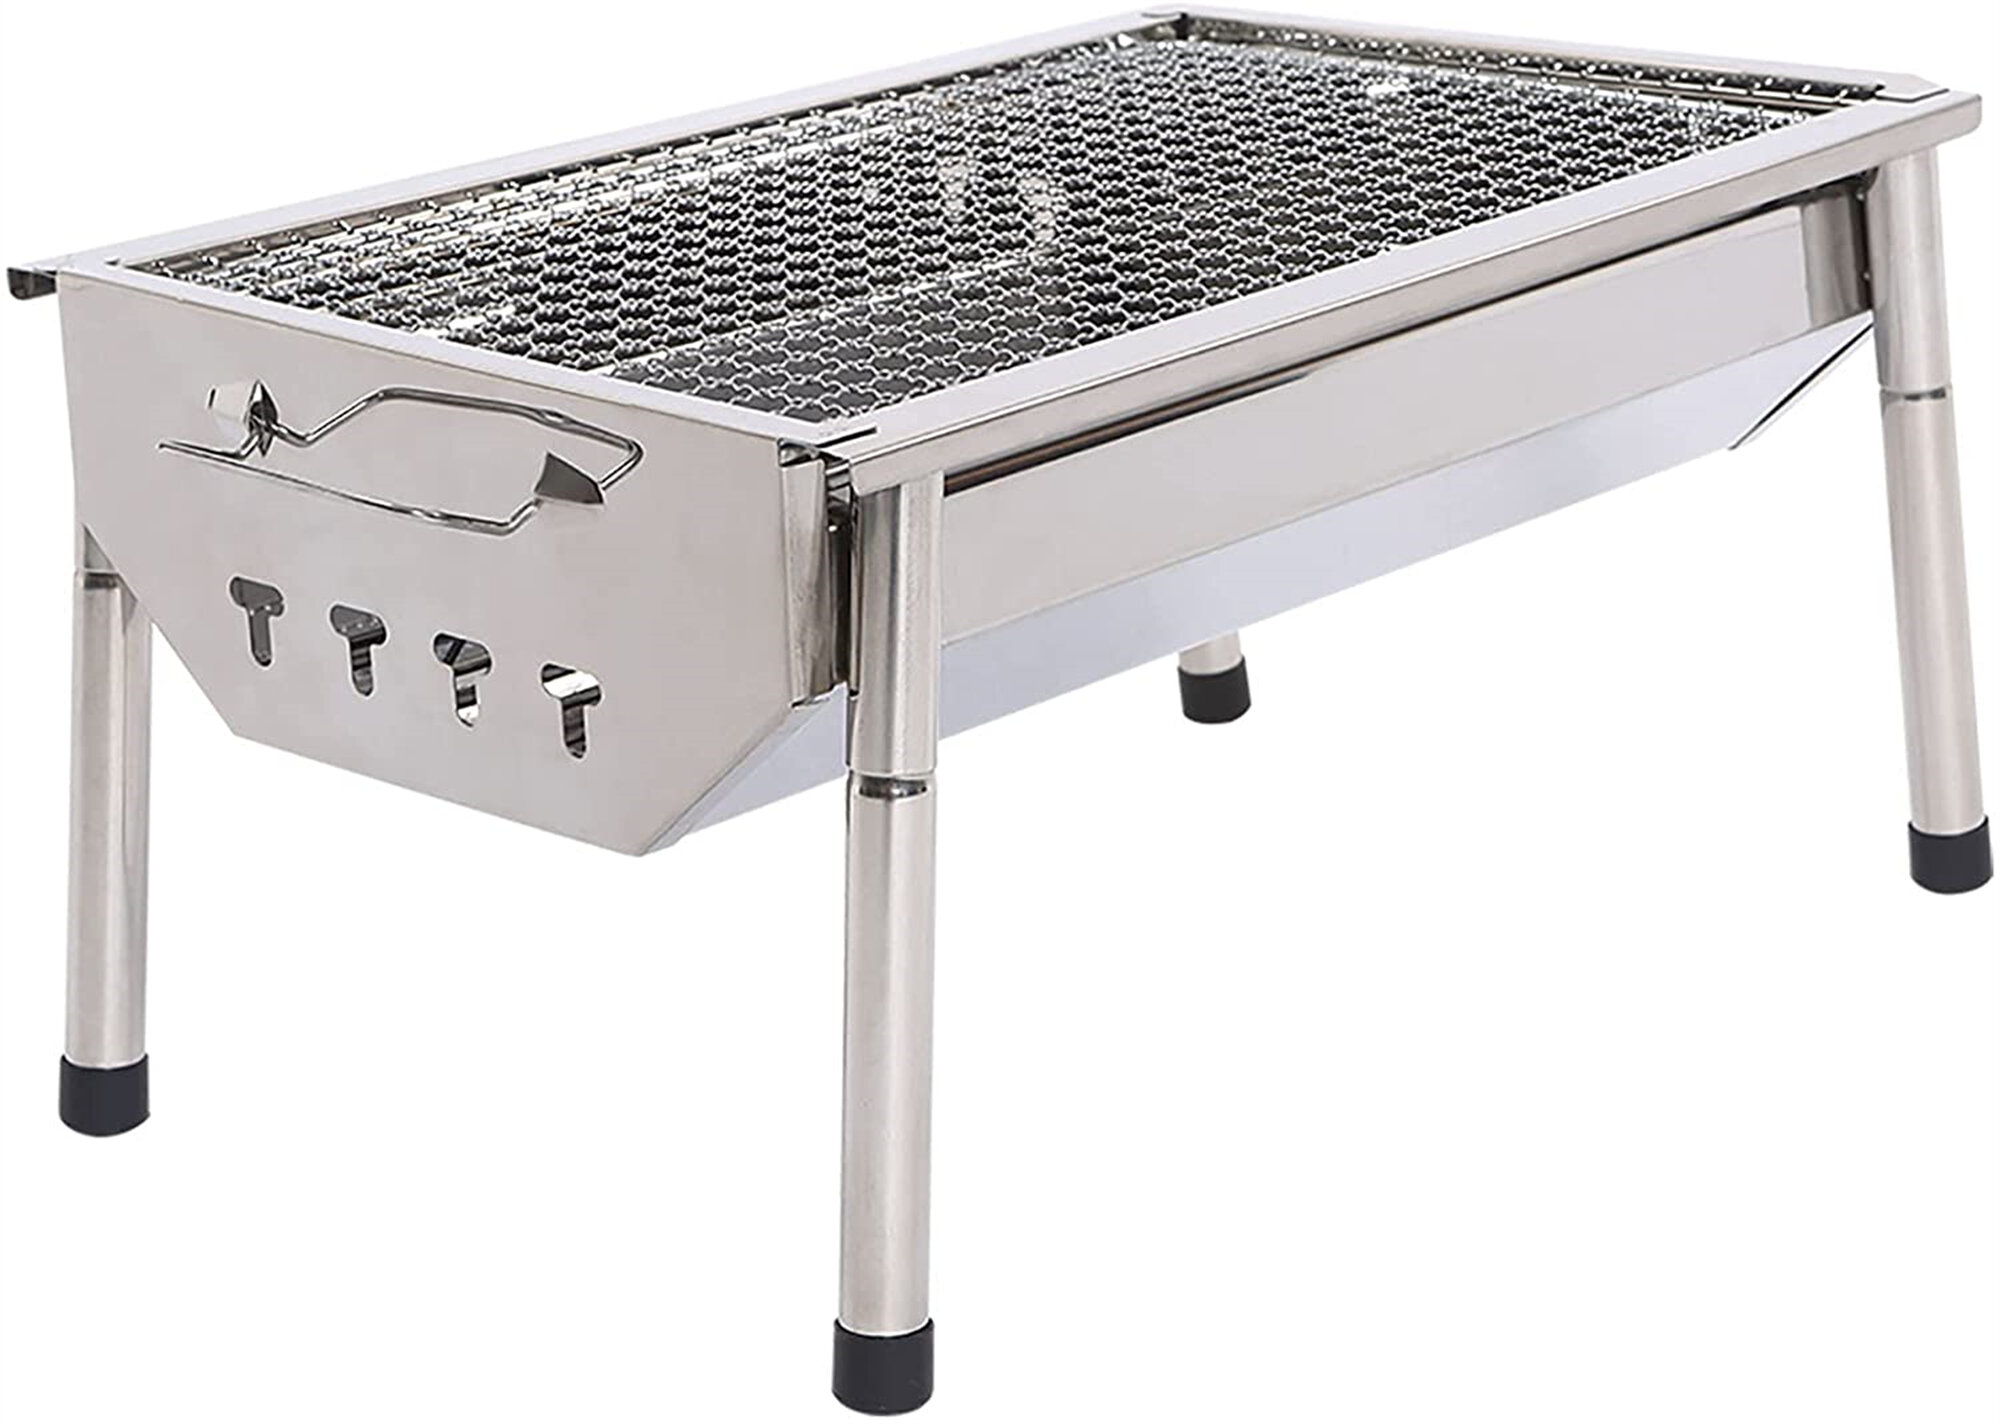 Stainless Steel Barbecue Meat Grill Rack Shish Kabob Holder Display Server Tray